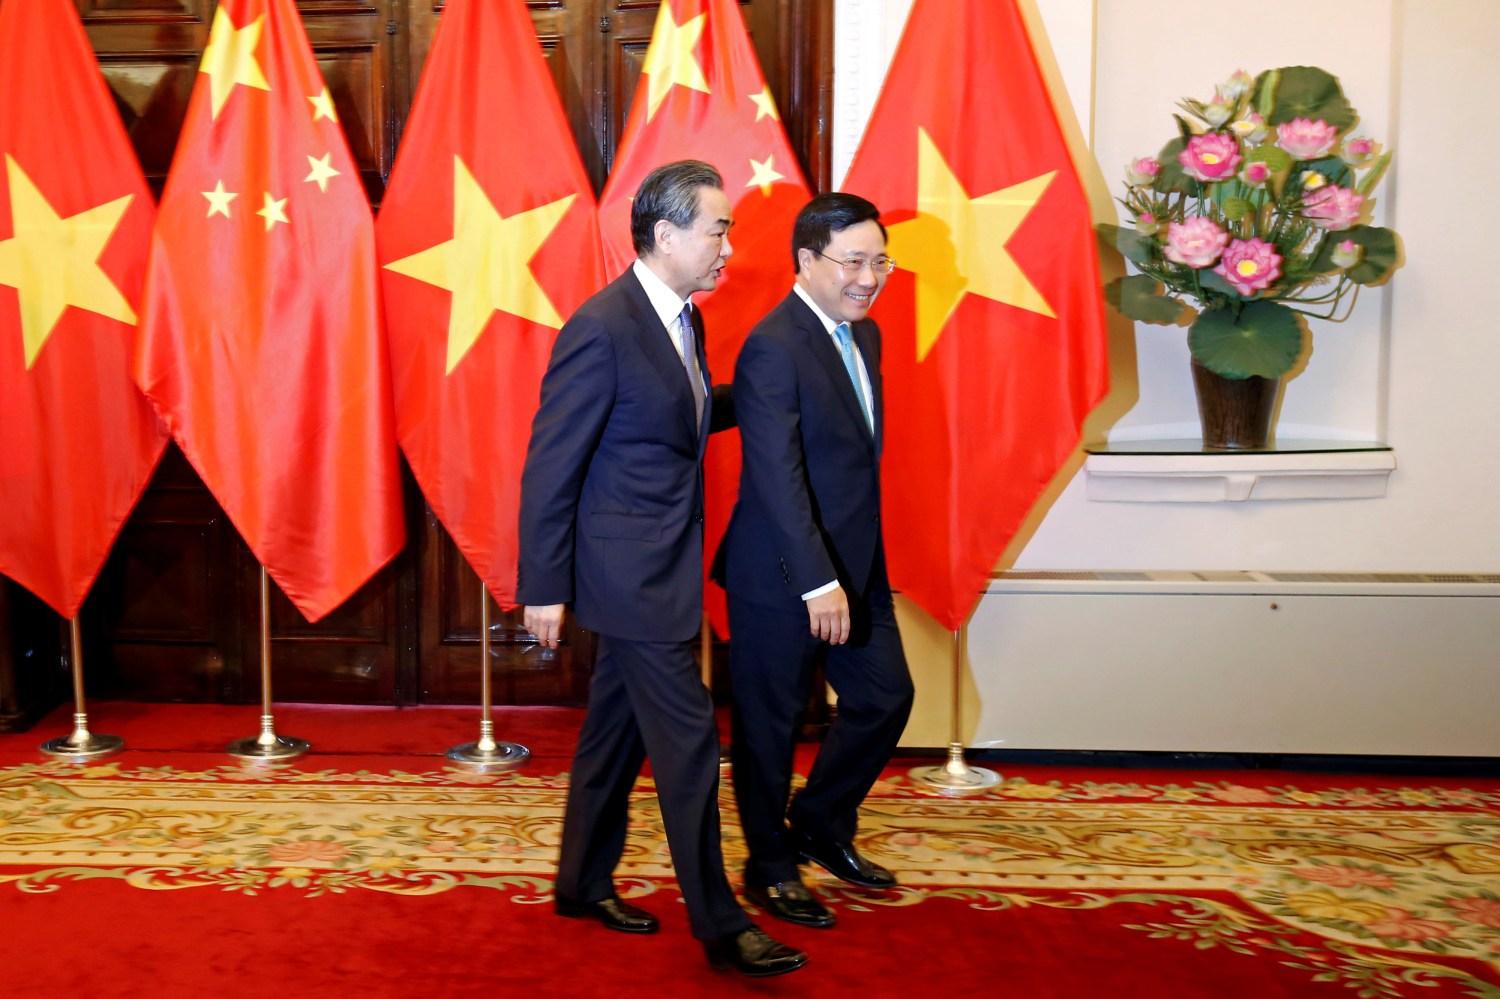 China's State Councilor and Foreign Minister Wang Yi (L) and Vietnam's Deputy Prime Minister and Foreign Minister Pham Binh Minh walk to a meeting room at the Government Guesthouse in Hanoi, Vietnam April 1, 2018. REUTERS/Kham - RC142FA2A510